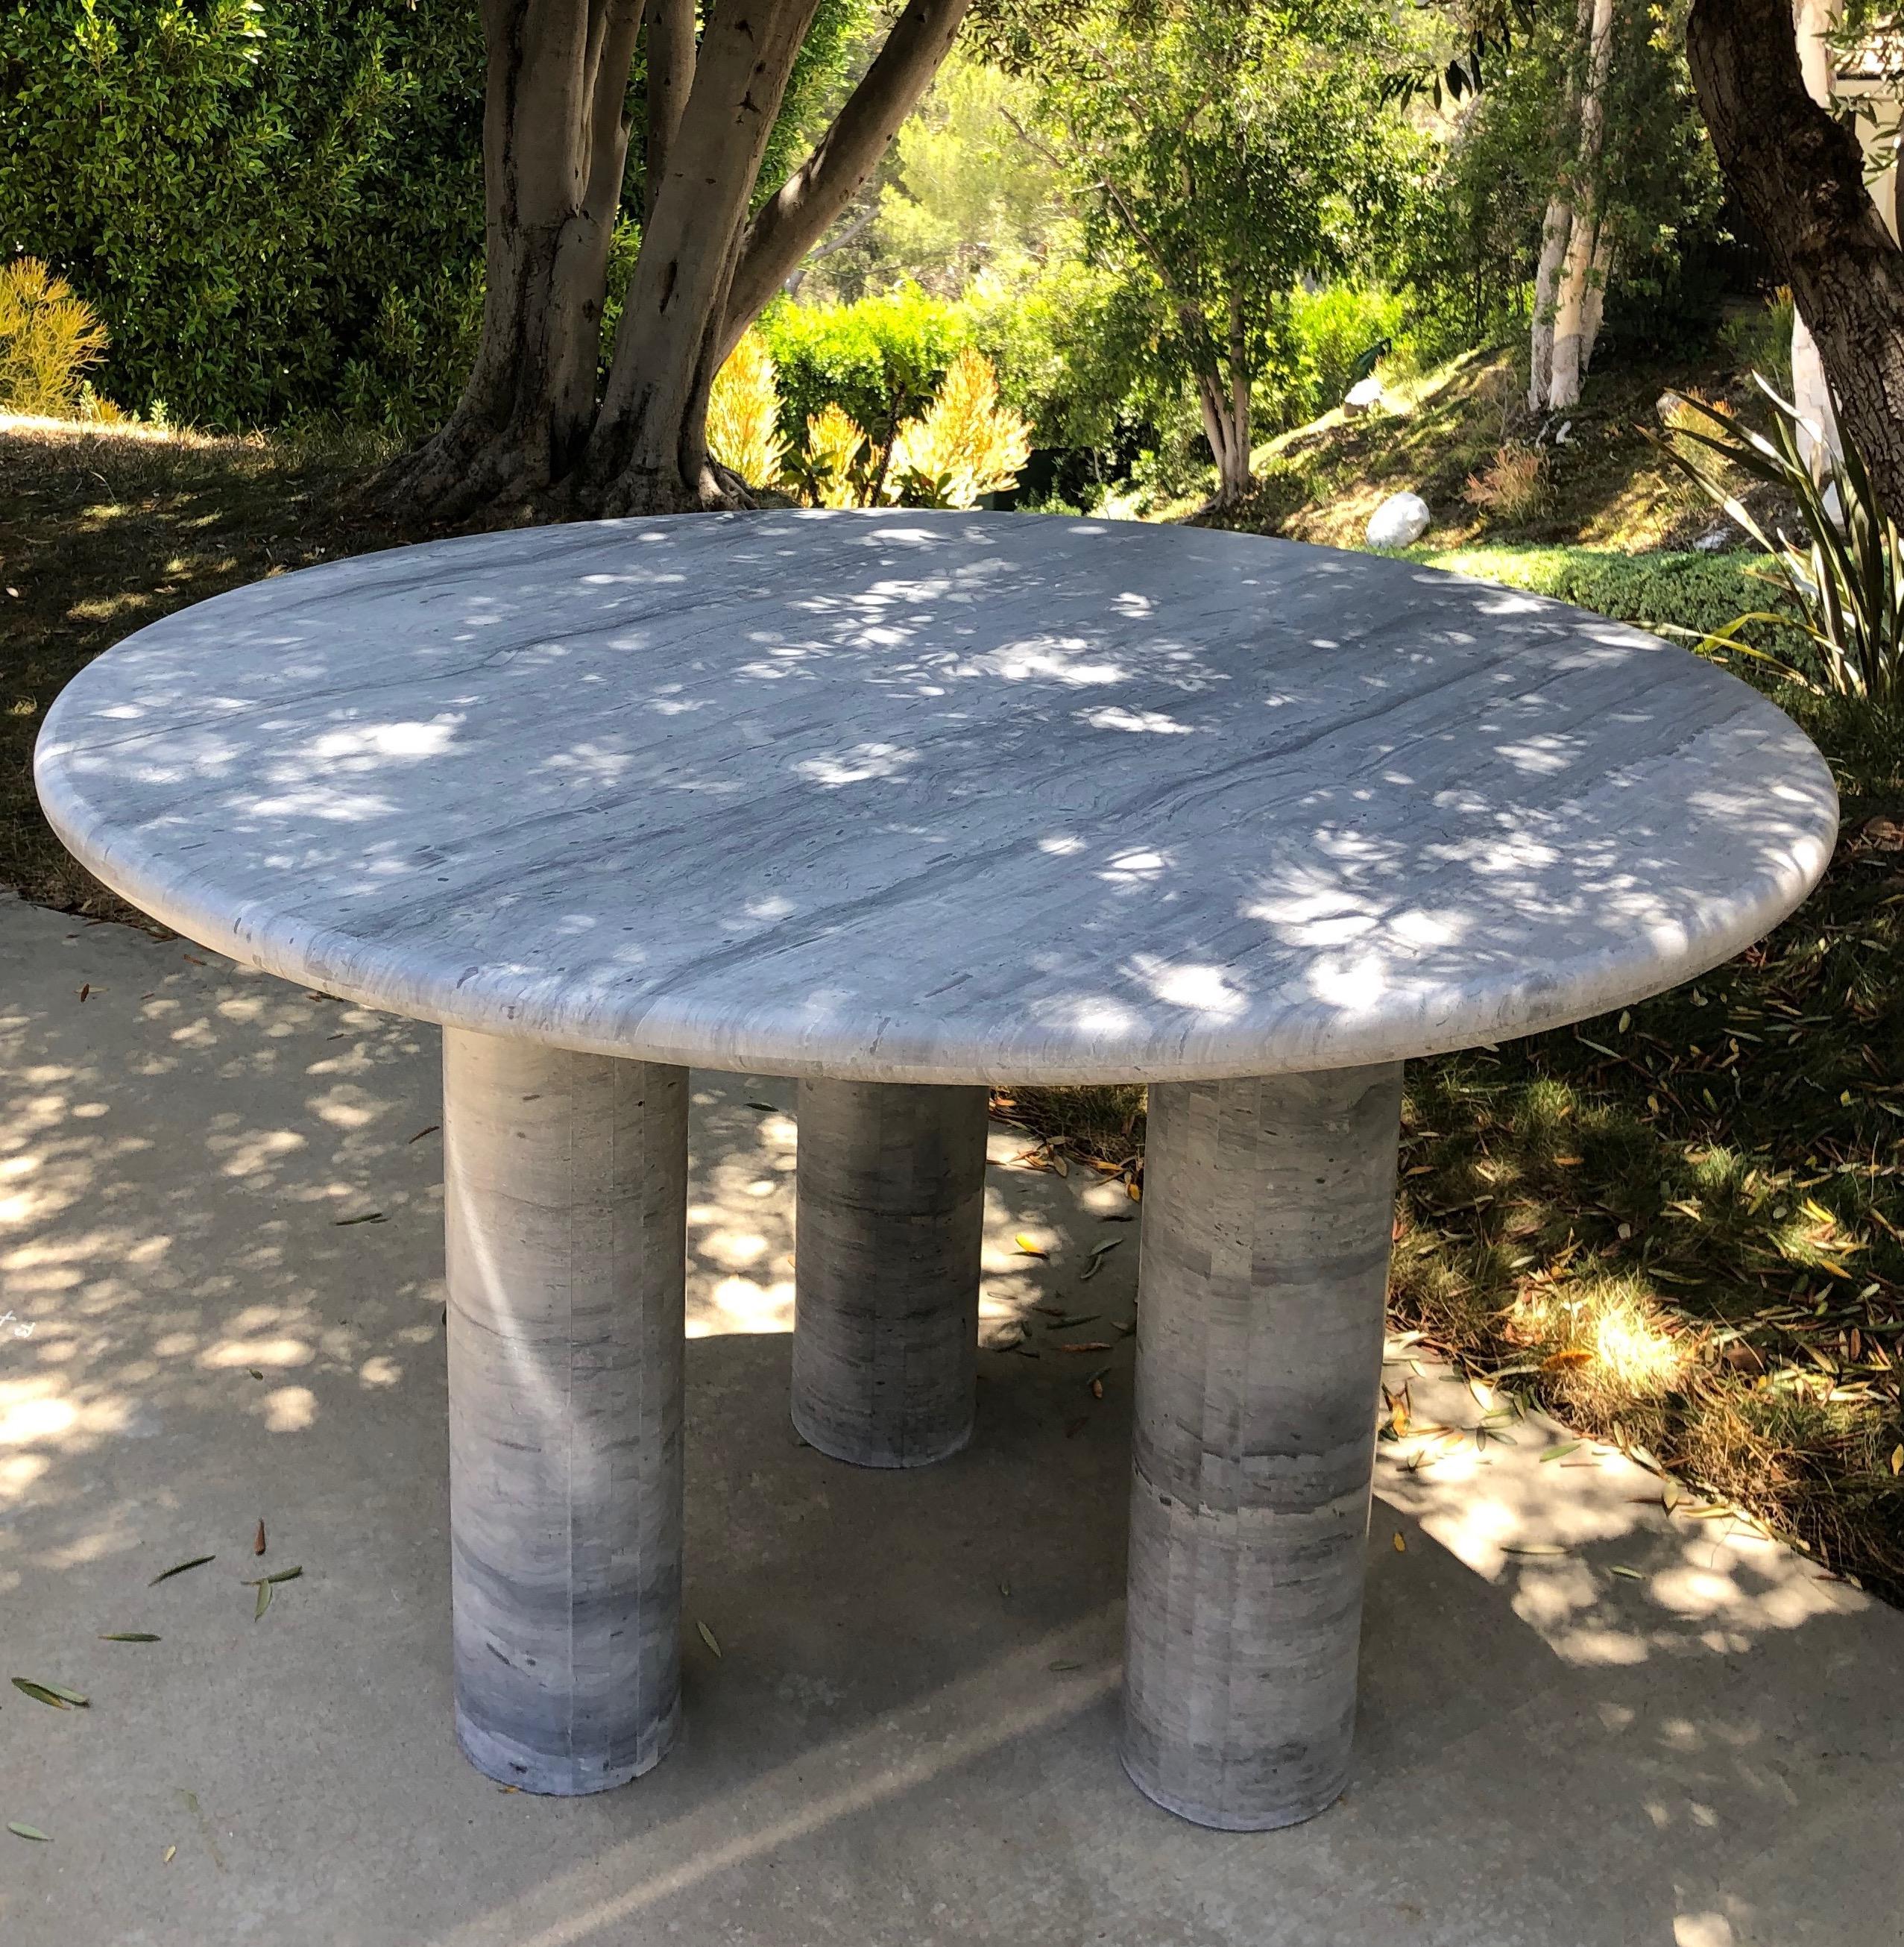 Monumental round dining table for entry or entertaining. Interpreted with moveable legs to personalize this home design statement.